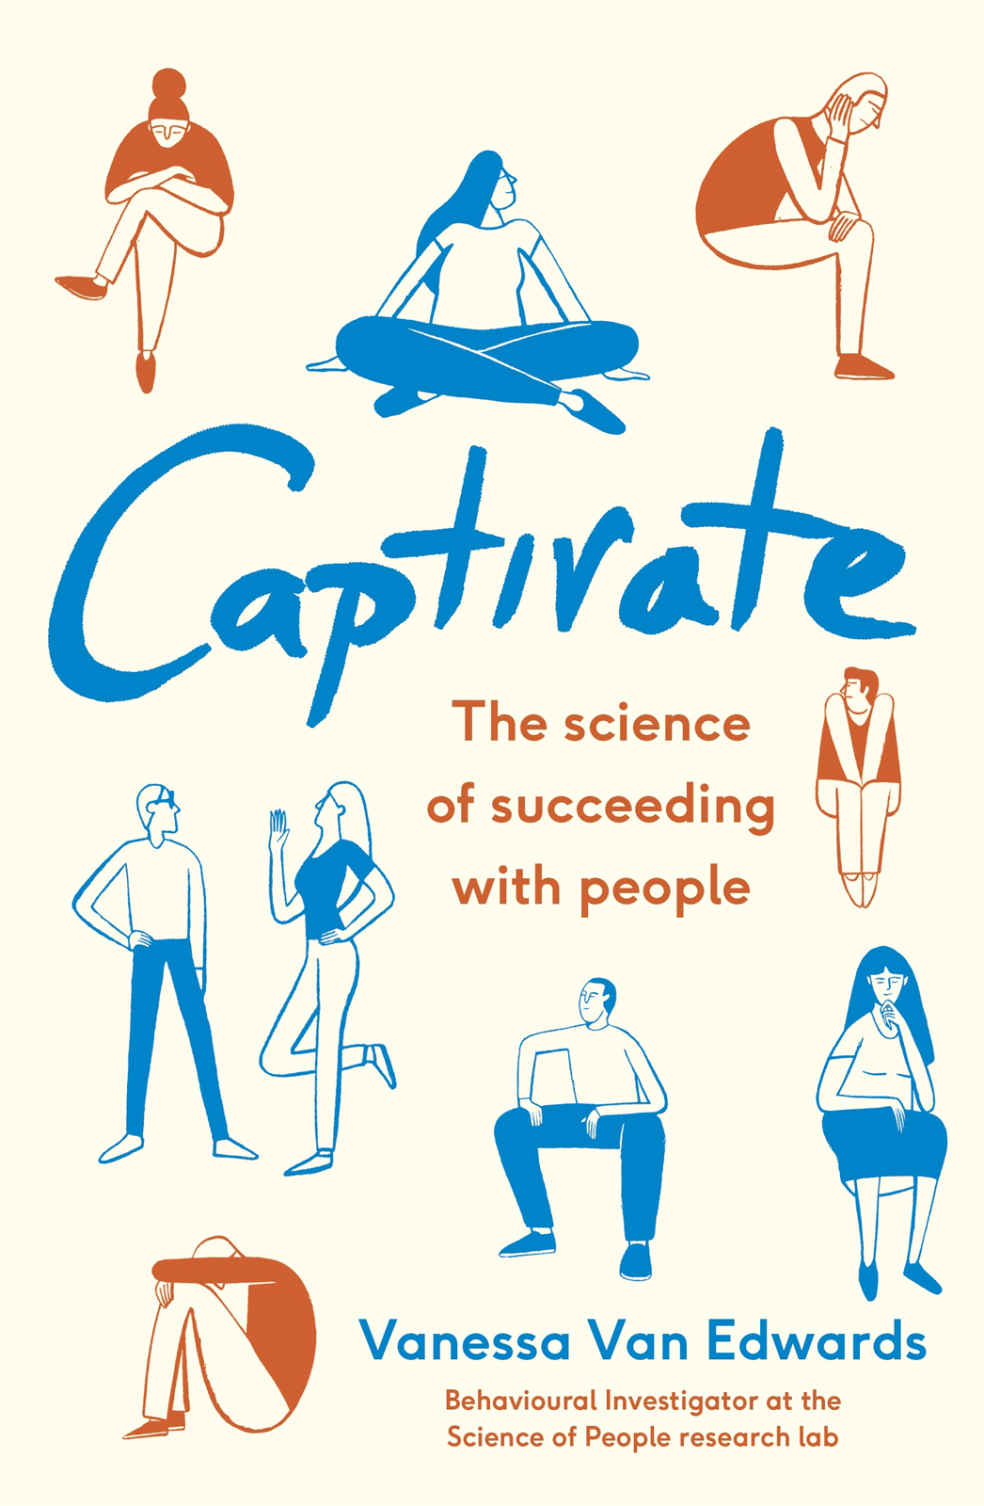 Captivate: The Science of Succeeding with People